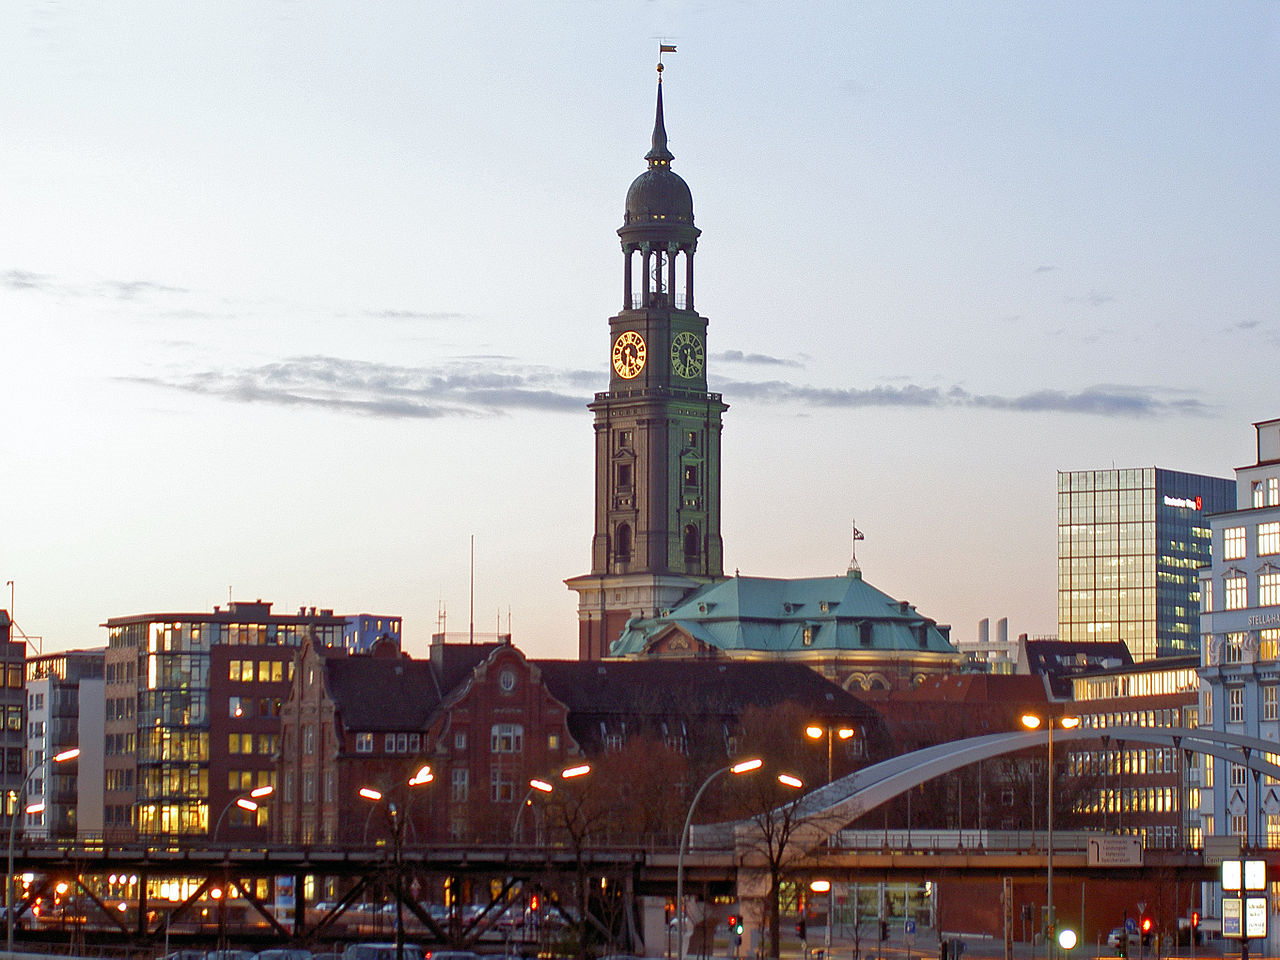 Travel Guide to Hamburg, Germany’s second largest city